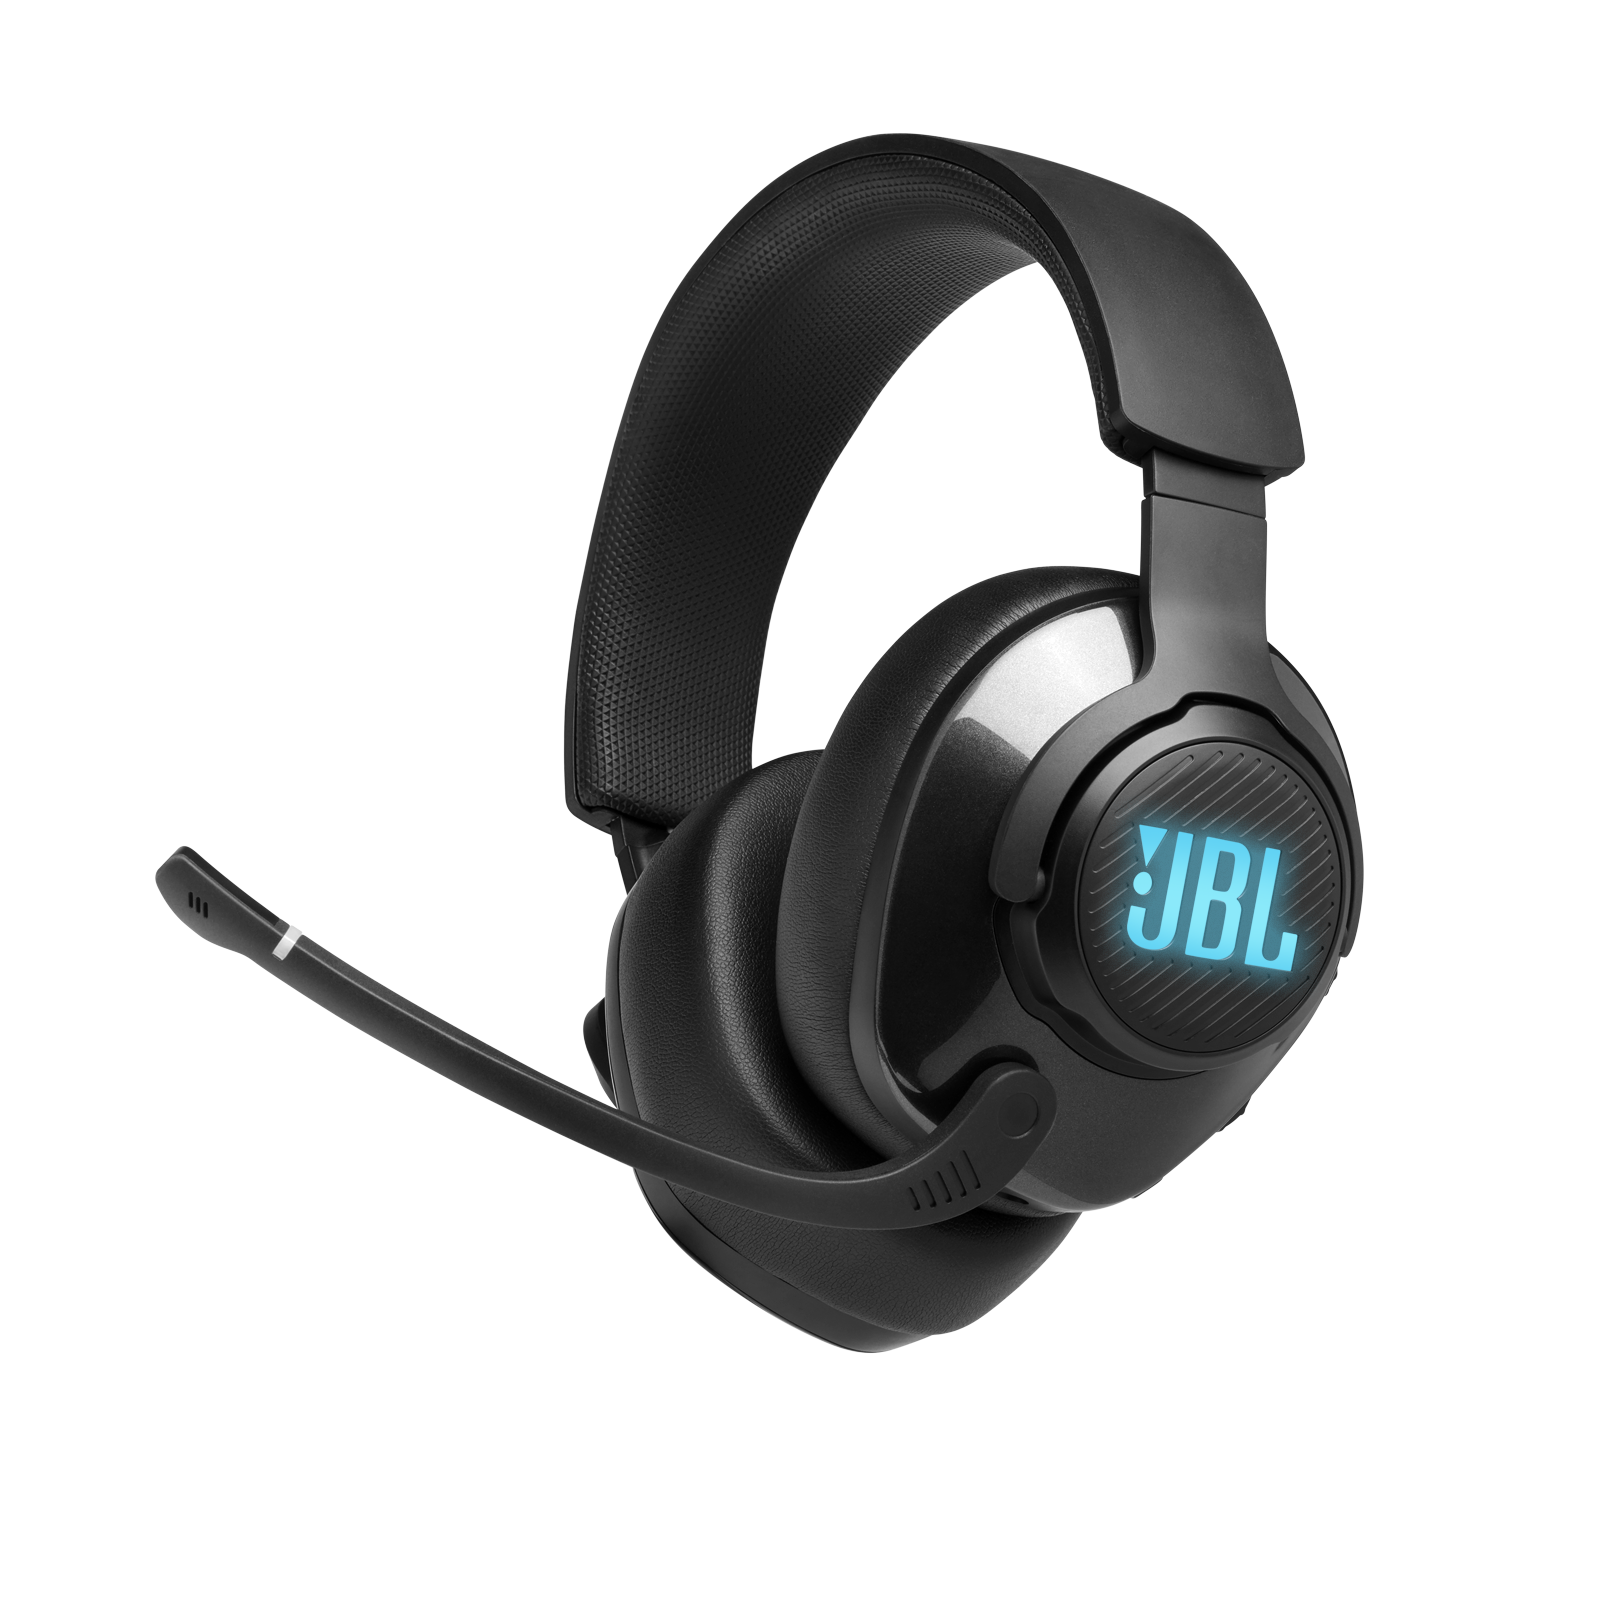 JBL Quantum 400 - Black - USB over-ear gaming headset with game-chat dial - Hero